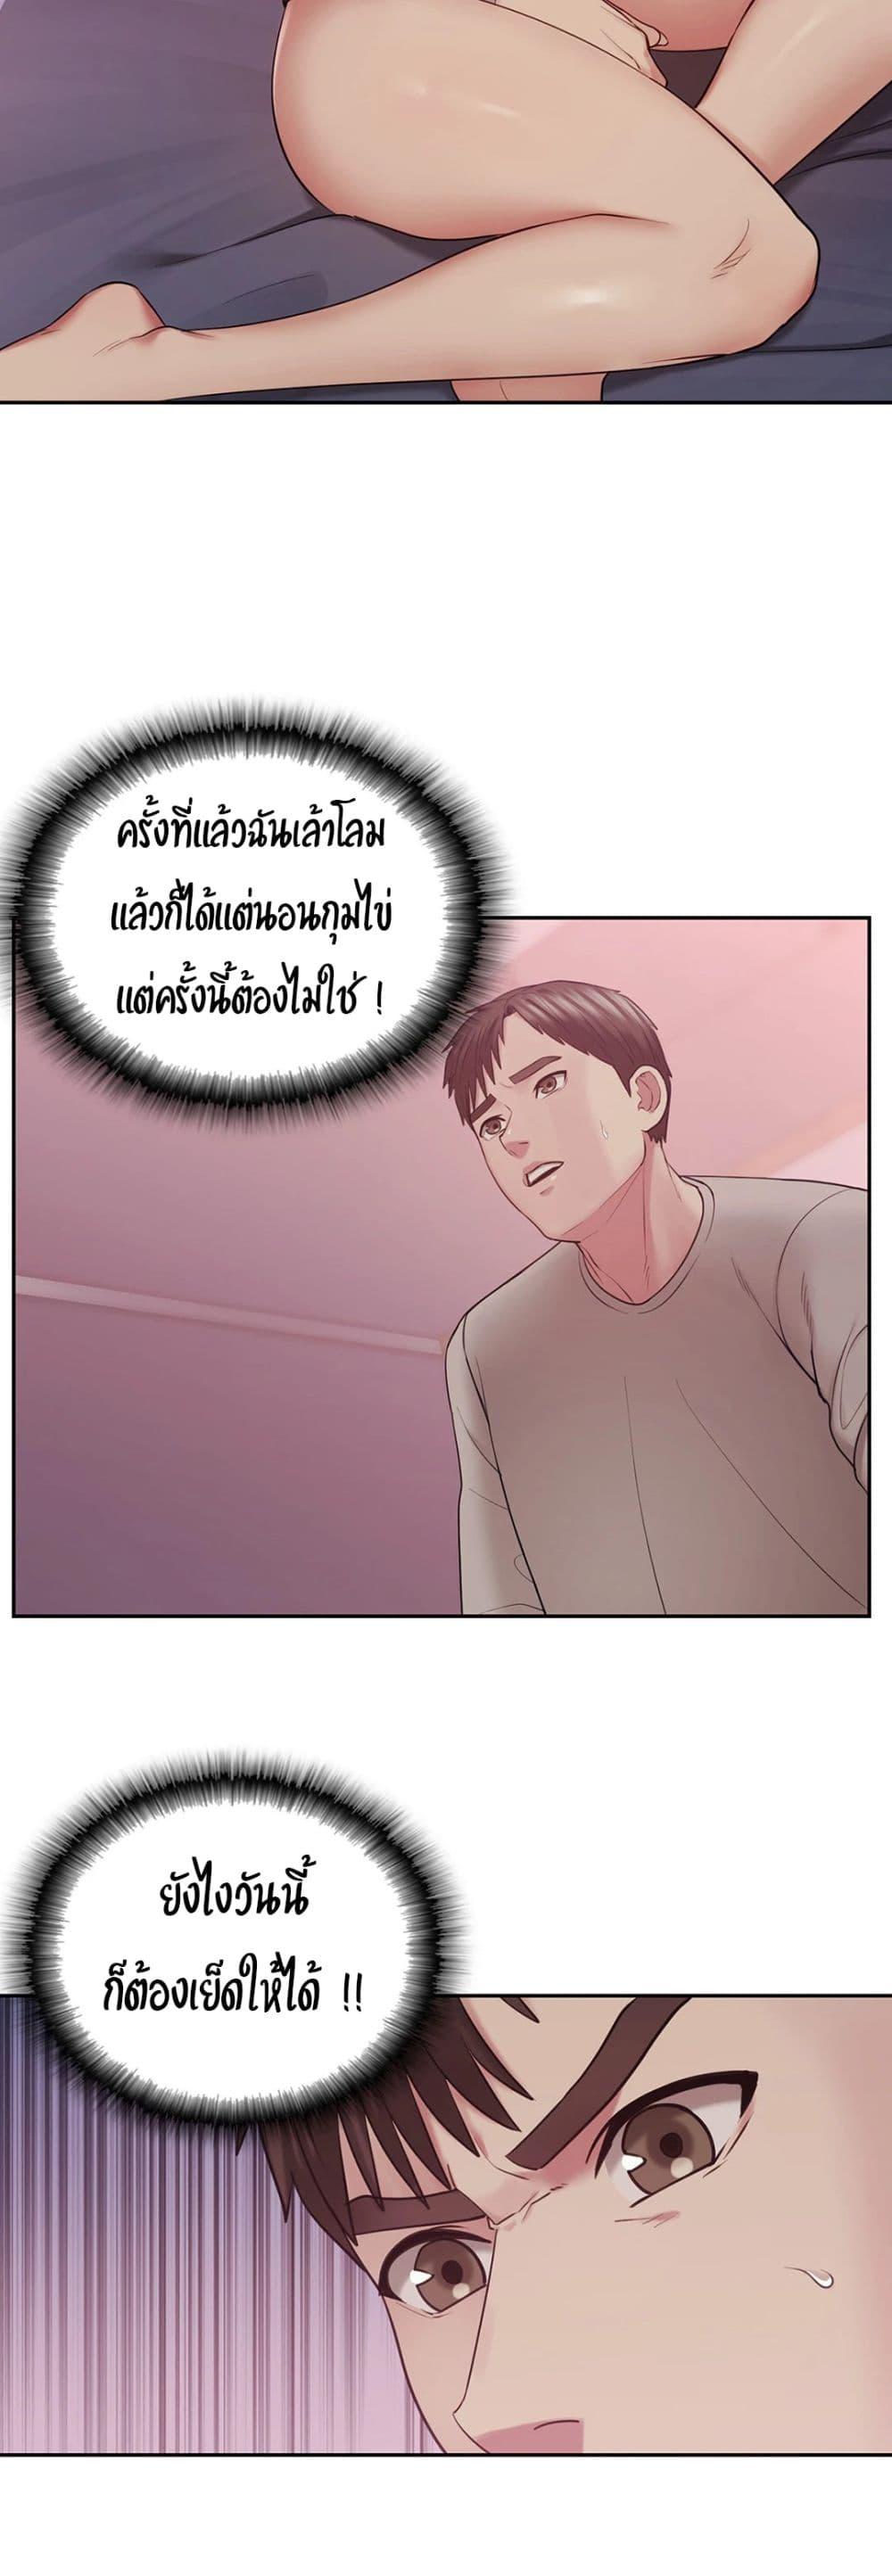 Sexual Consulting 1 ภาพ 22